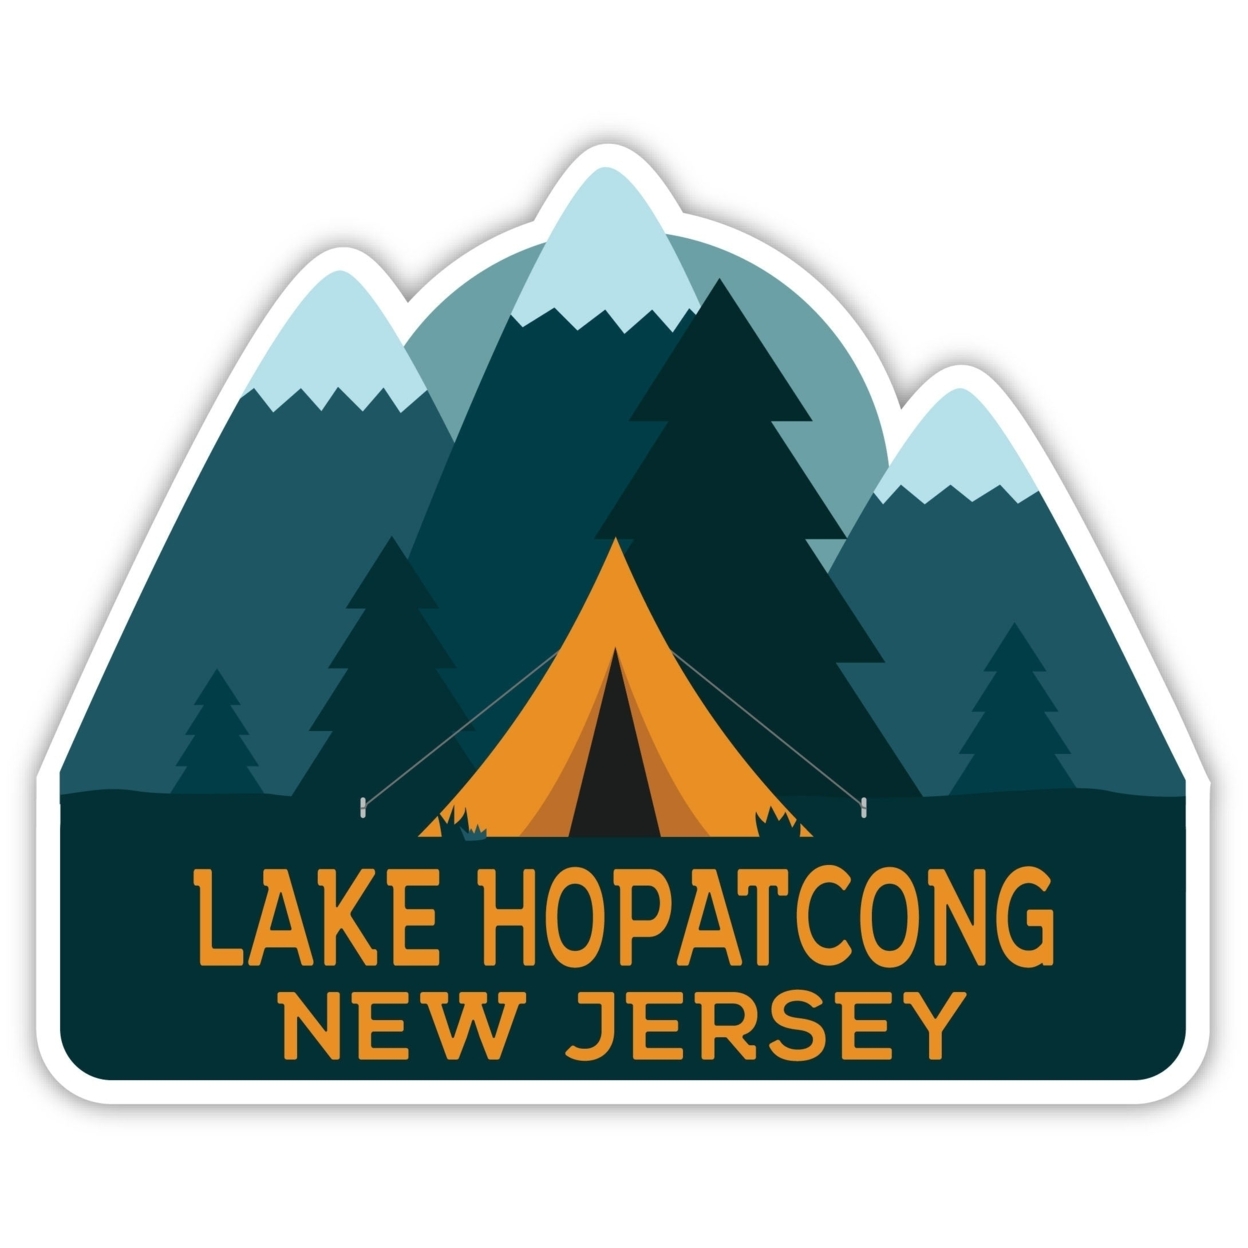 Lake Hopatcong New Jersey Souvenir Decorative Stickers (Choose Theme And Size) - 2-Inch, Tent